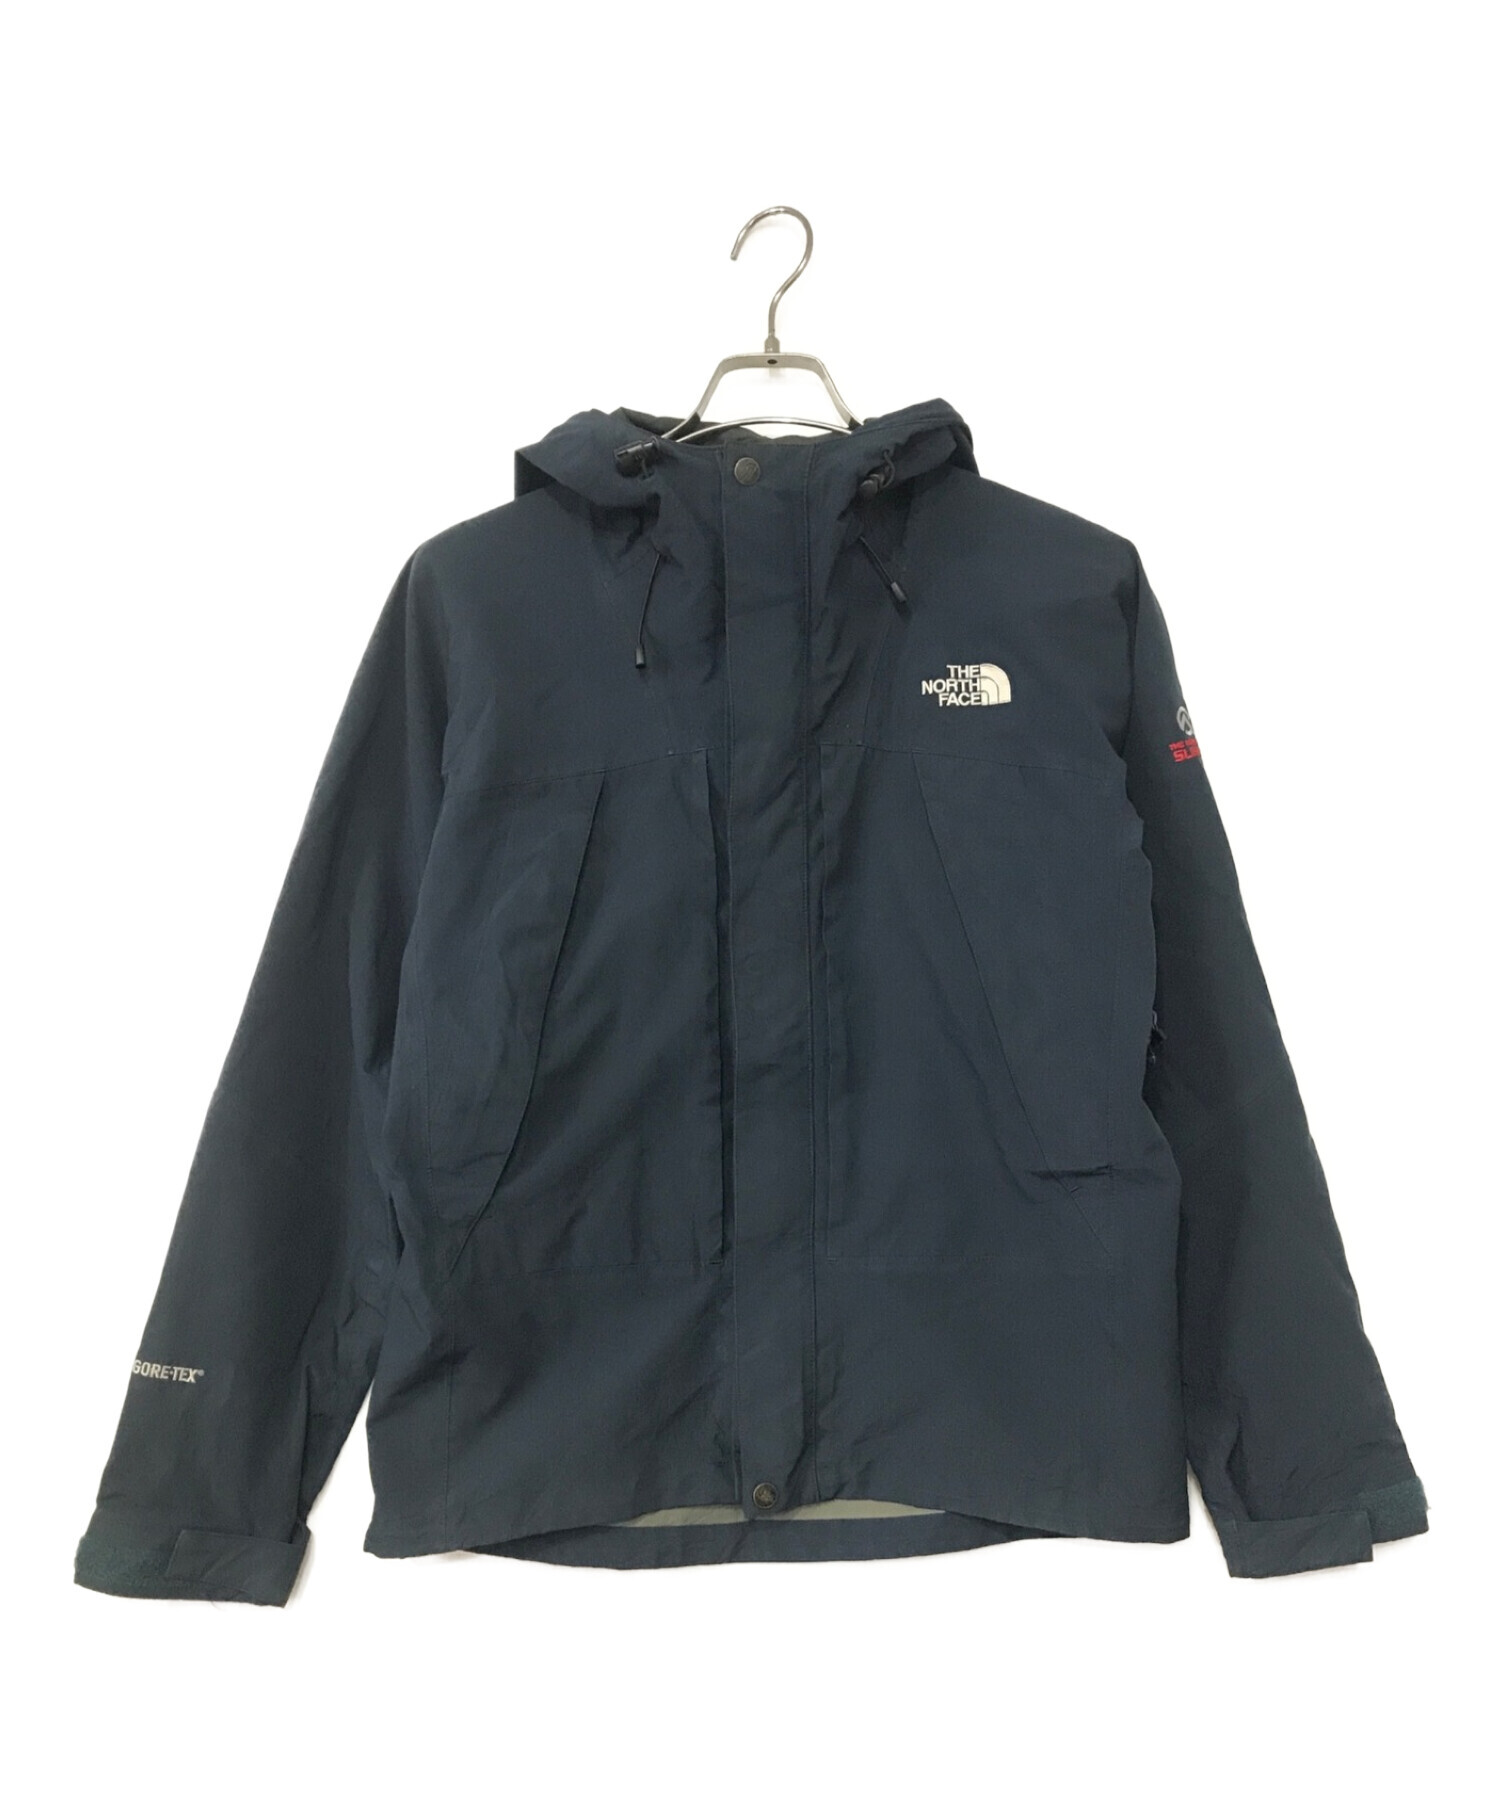 THE NORTH FACE  ALL MOUNTAIN JACKET品番NP61502